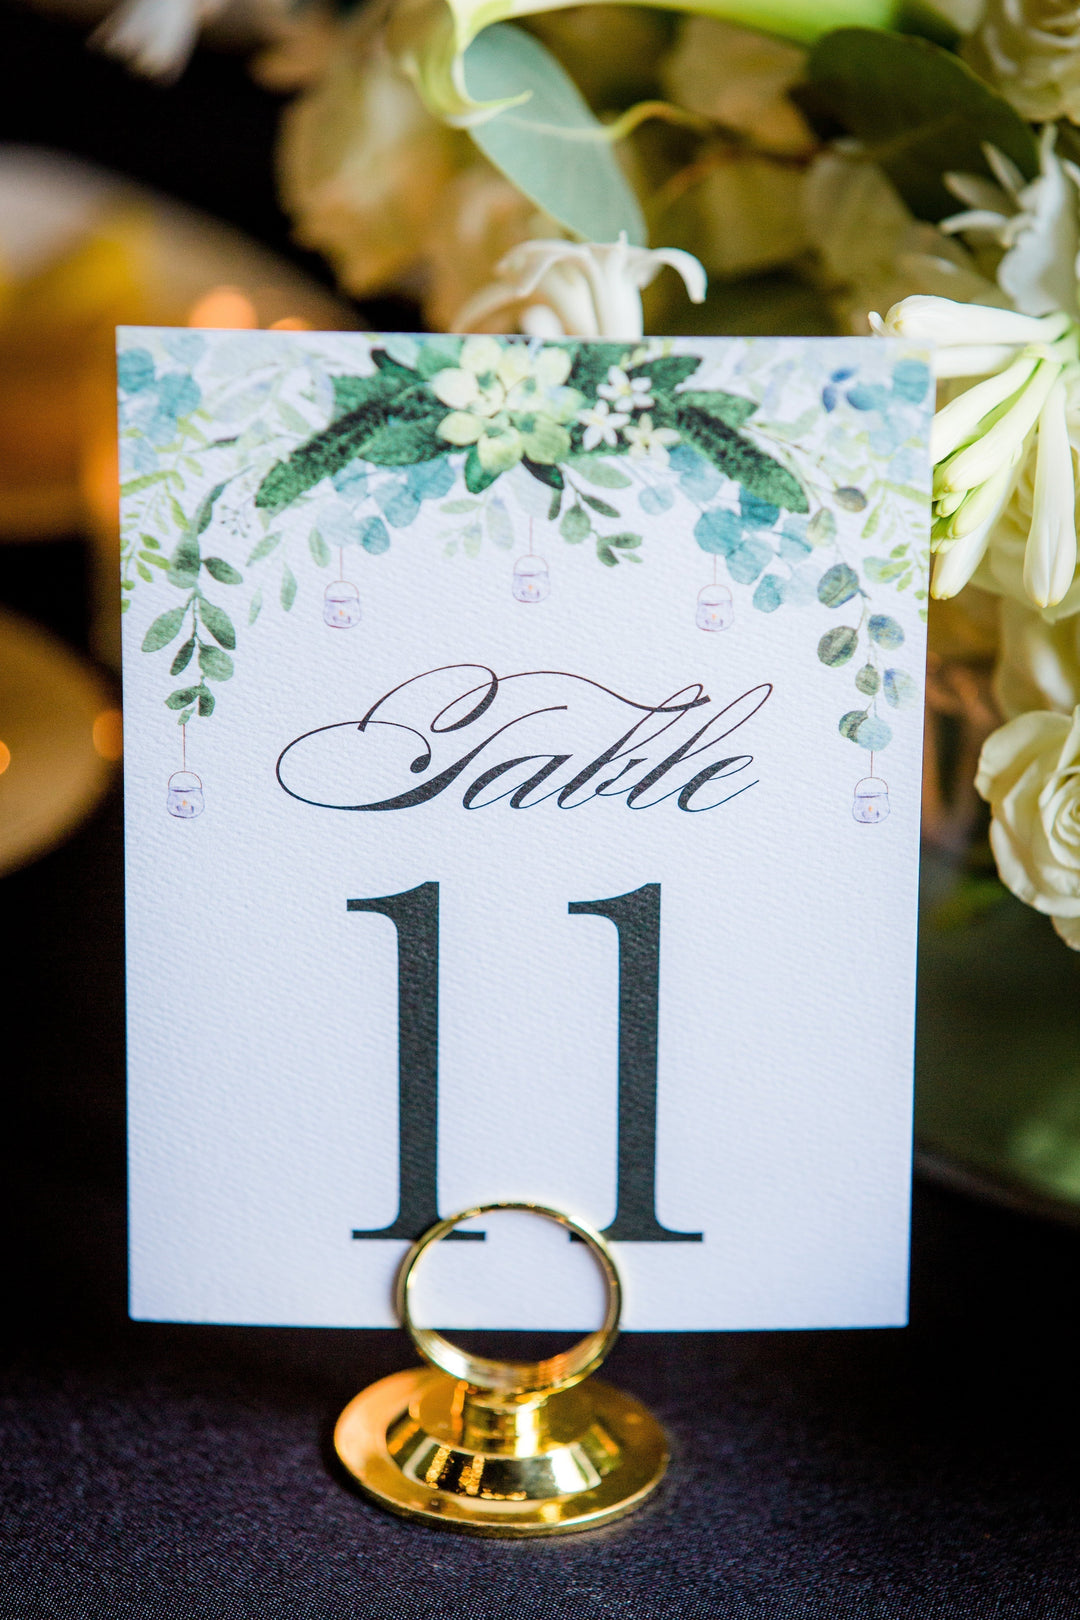 The Emily Table Number